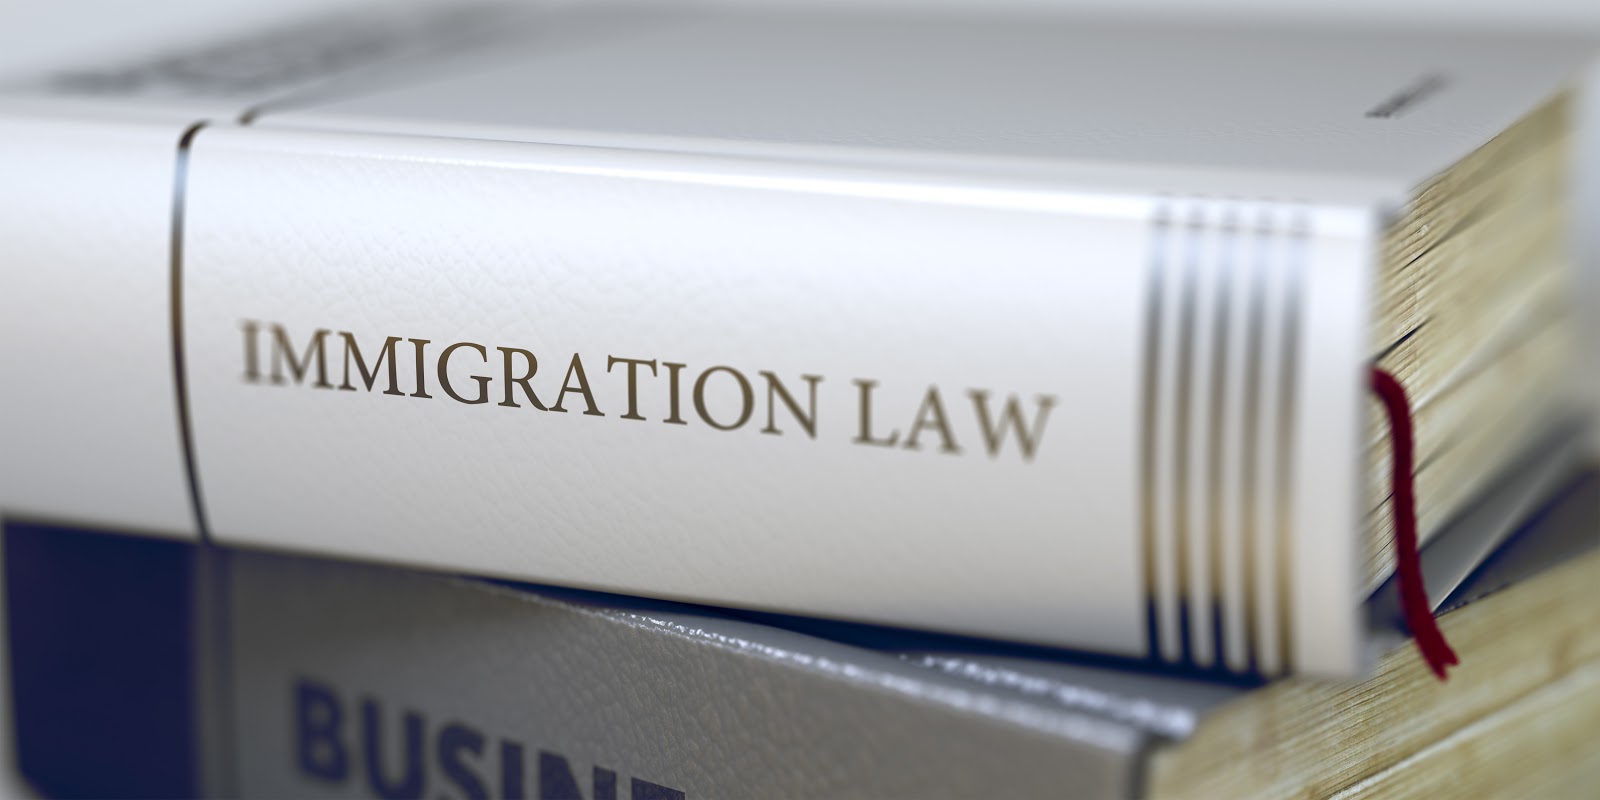 Book on immigration law